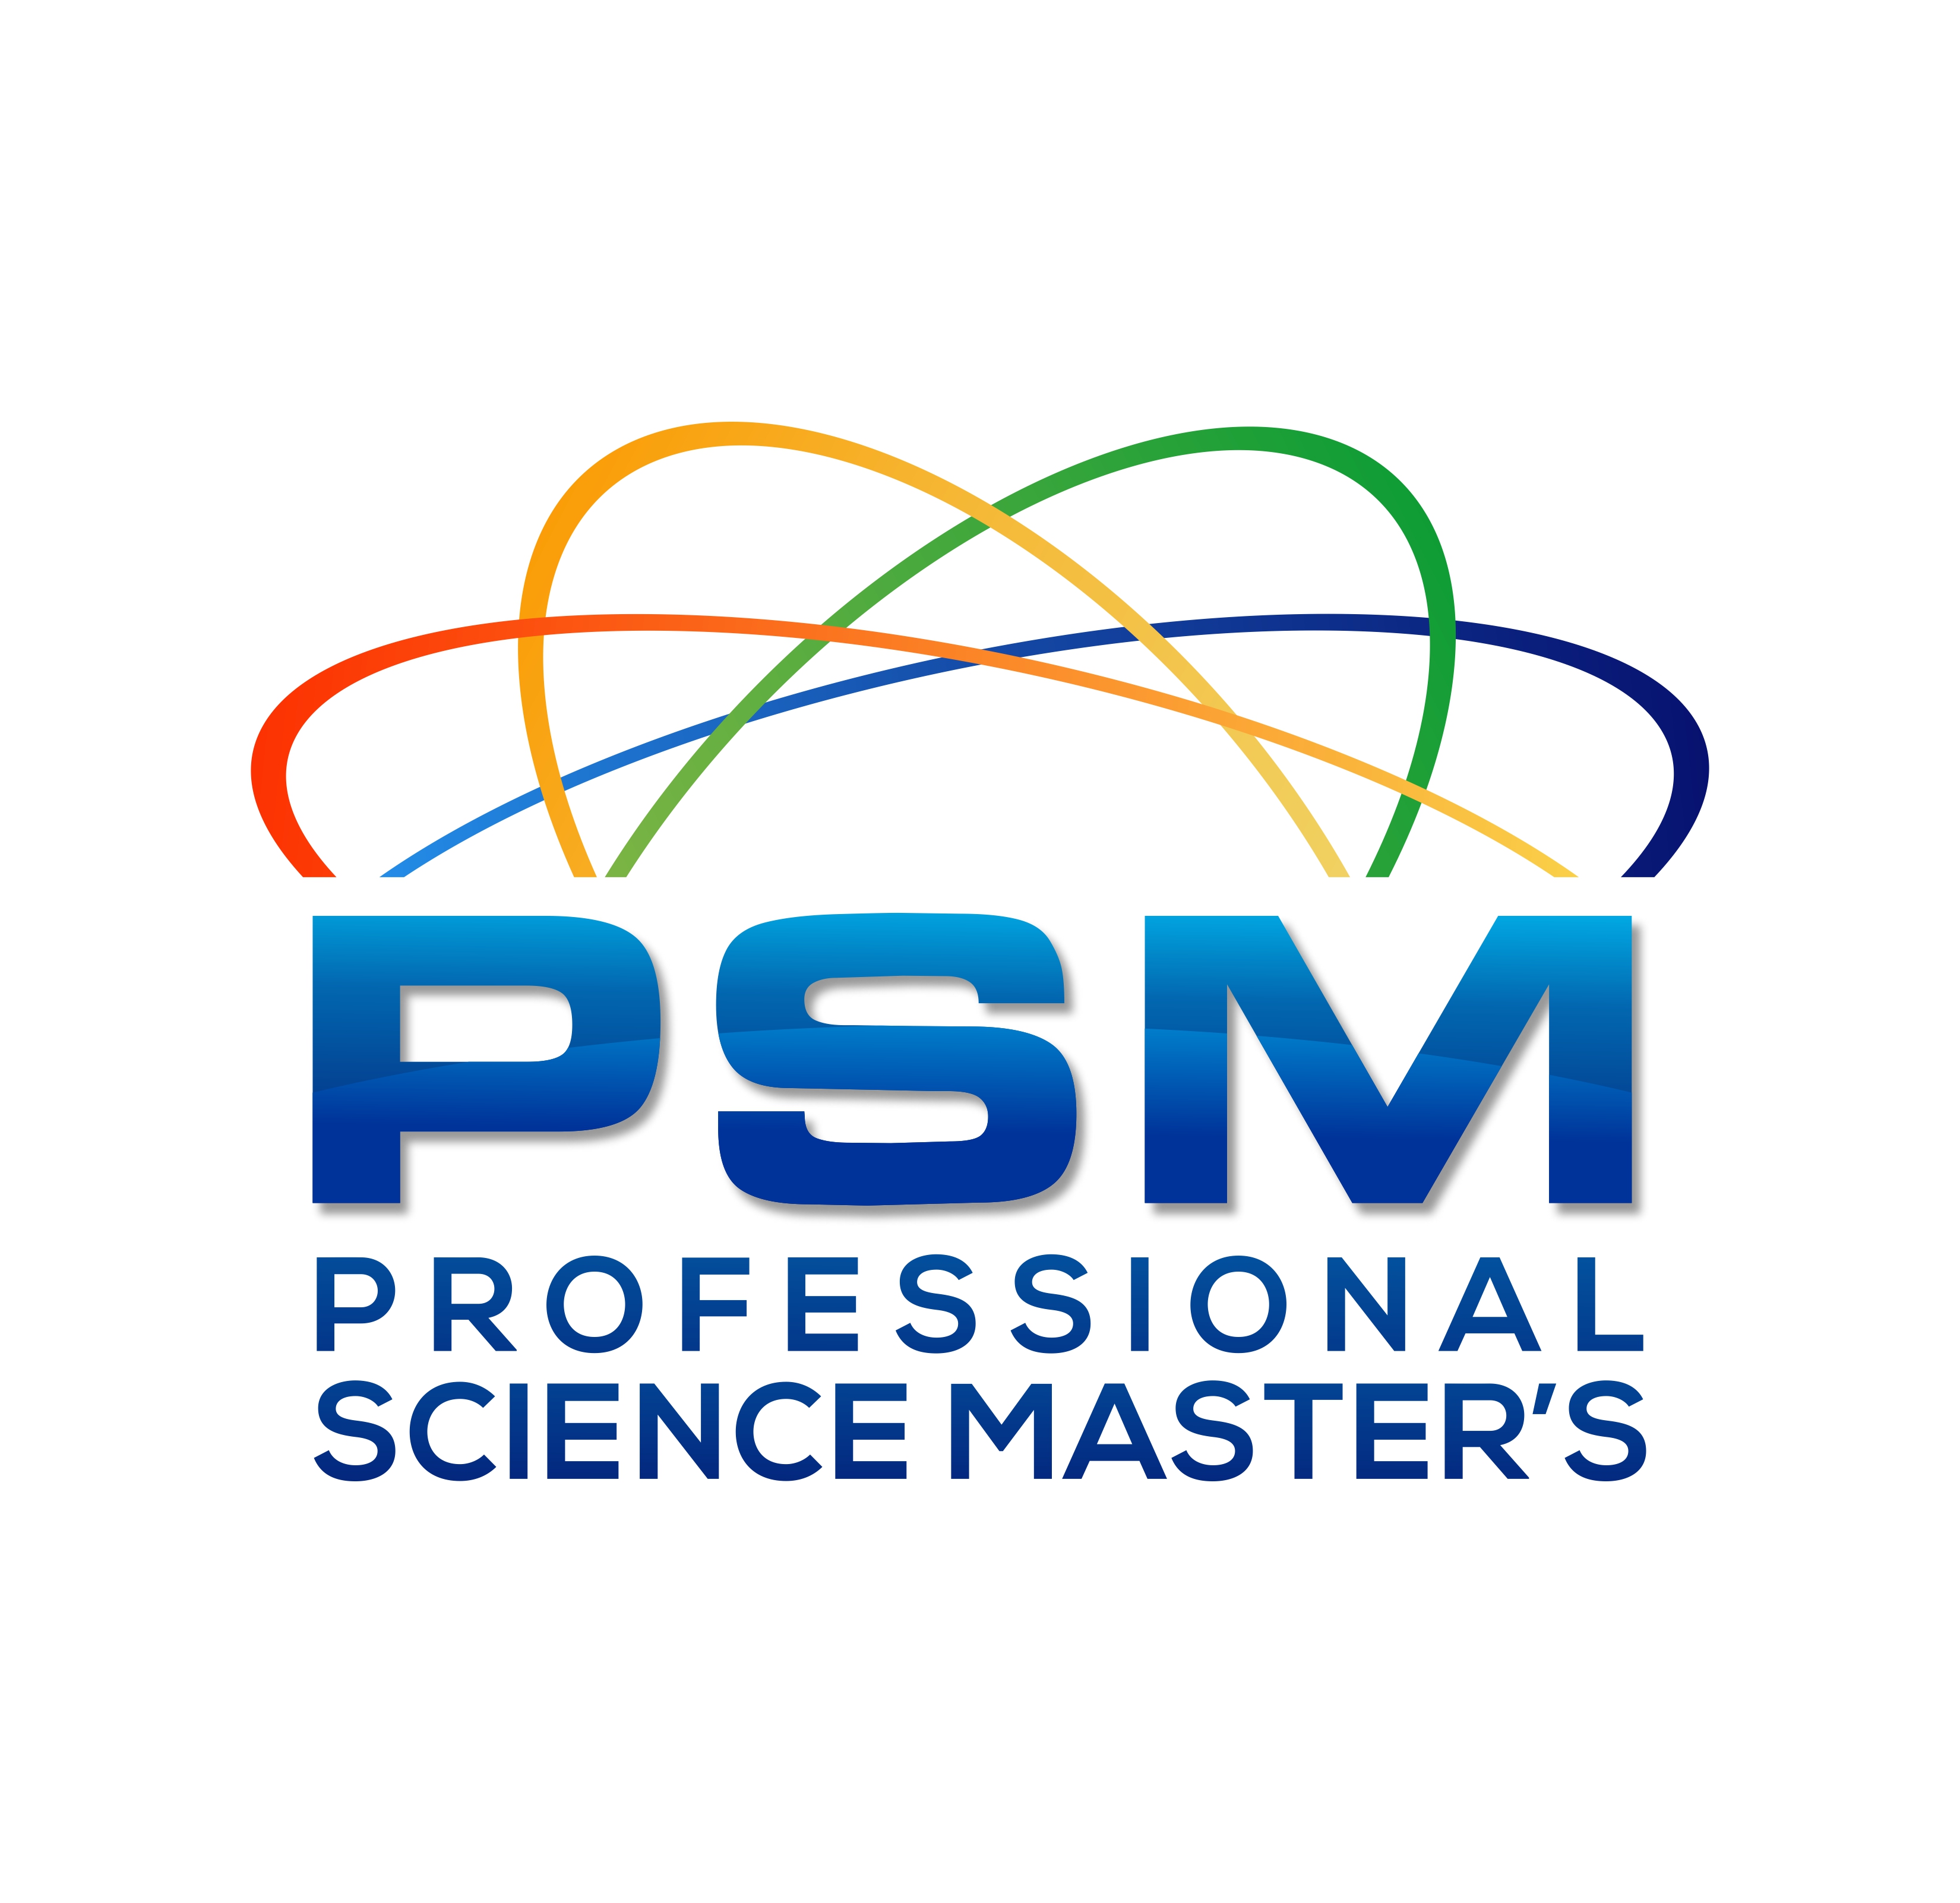 Professional Science Master's logo